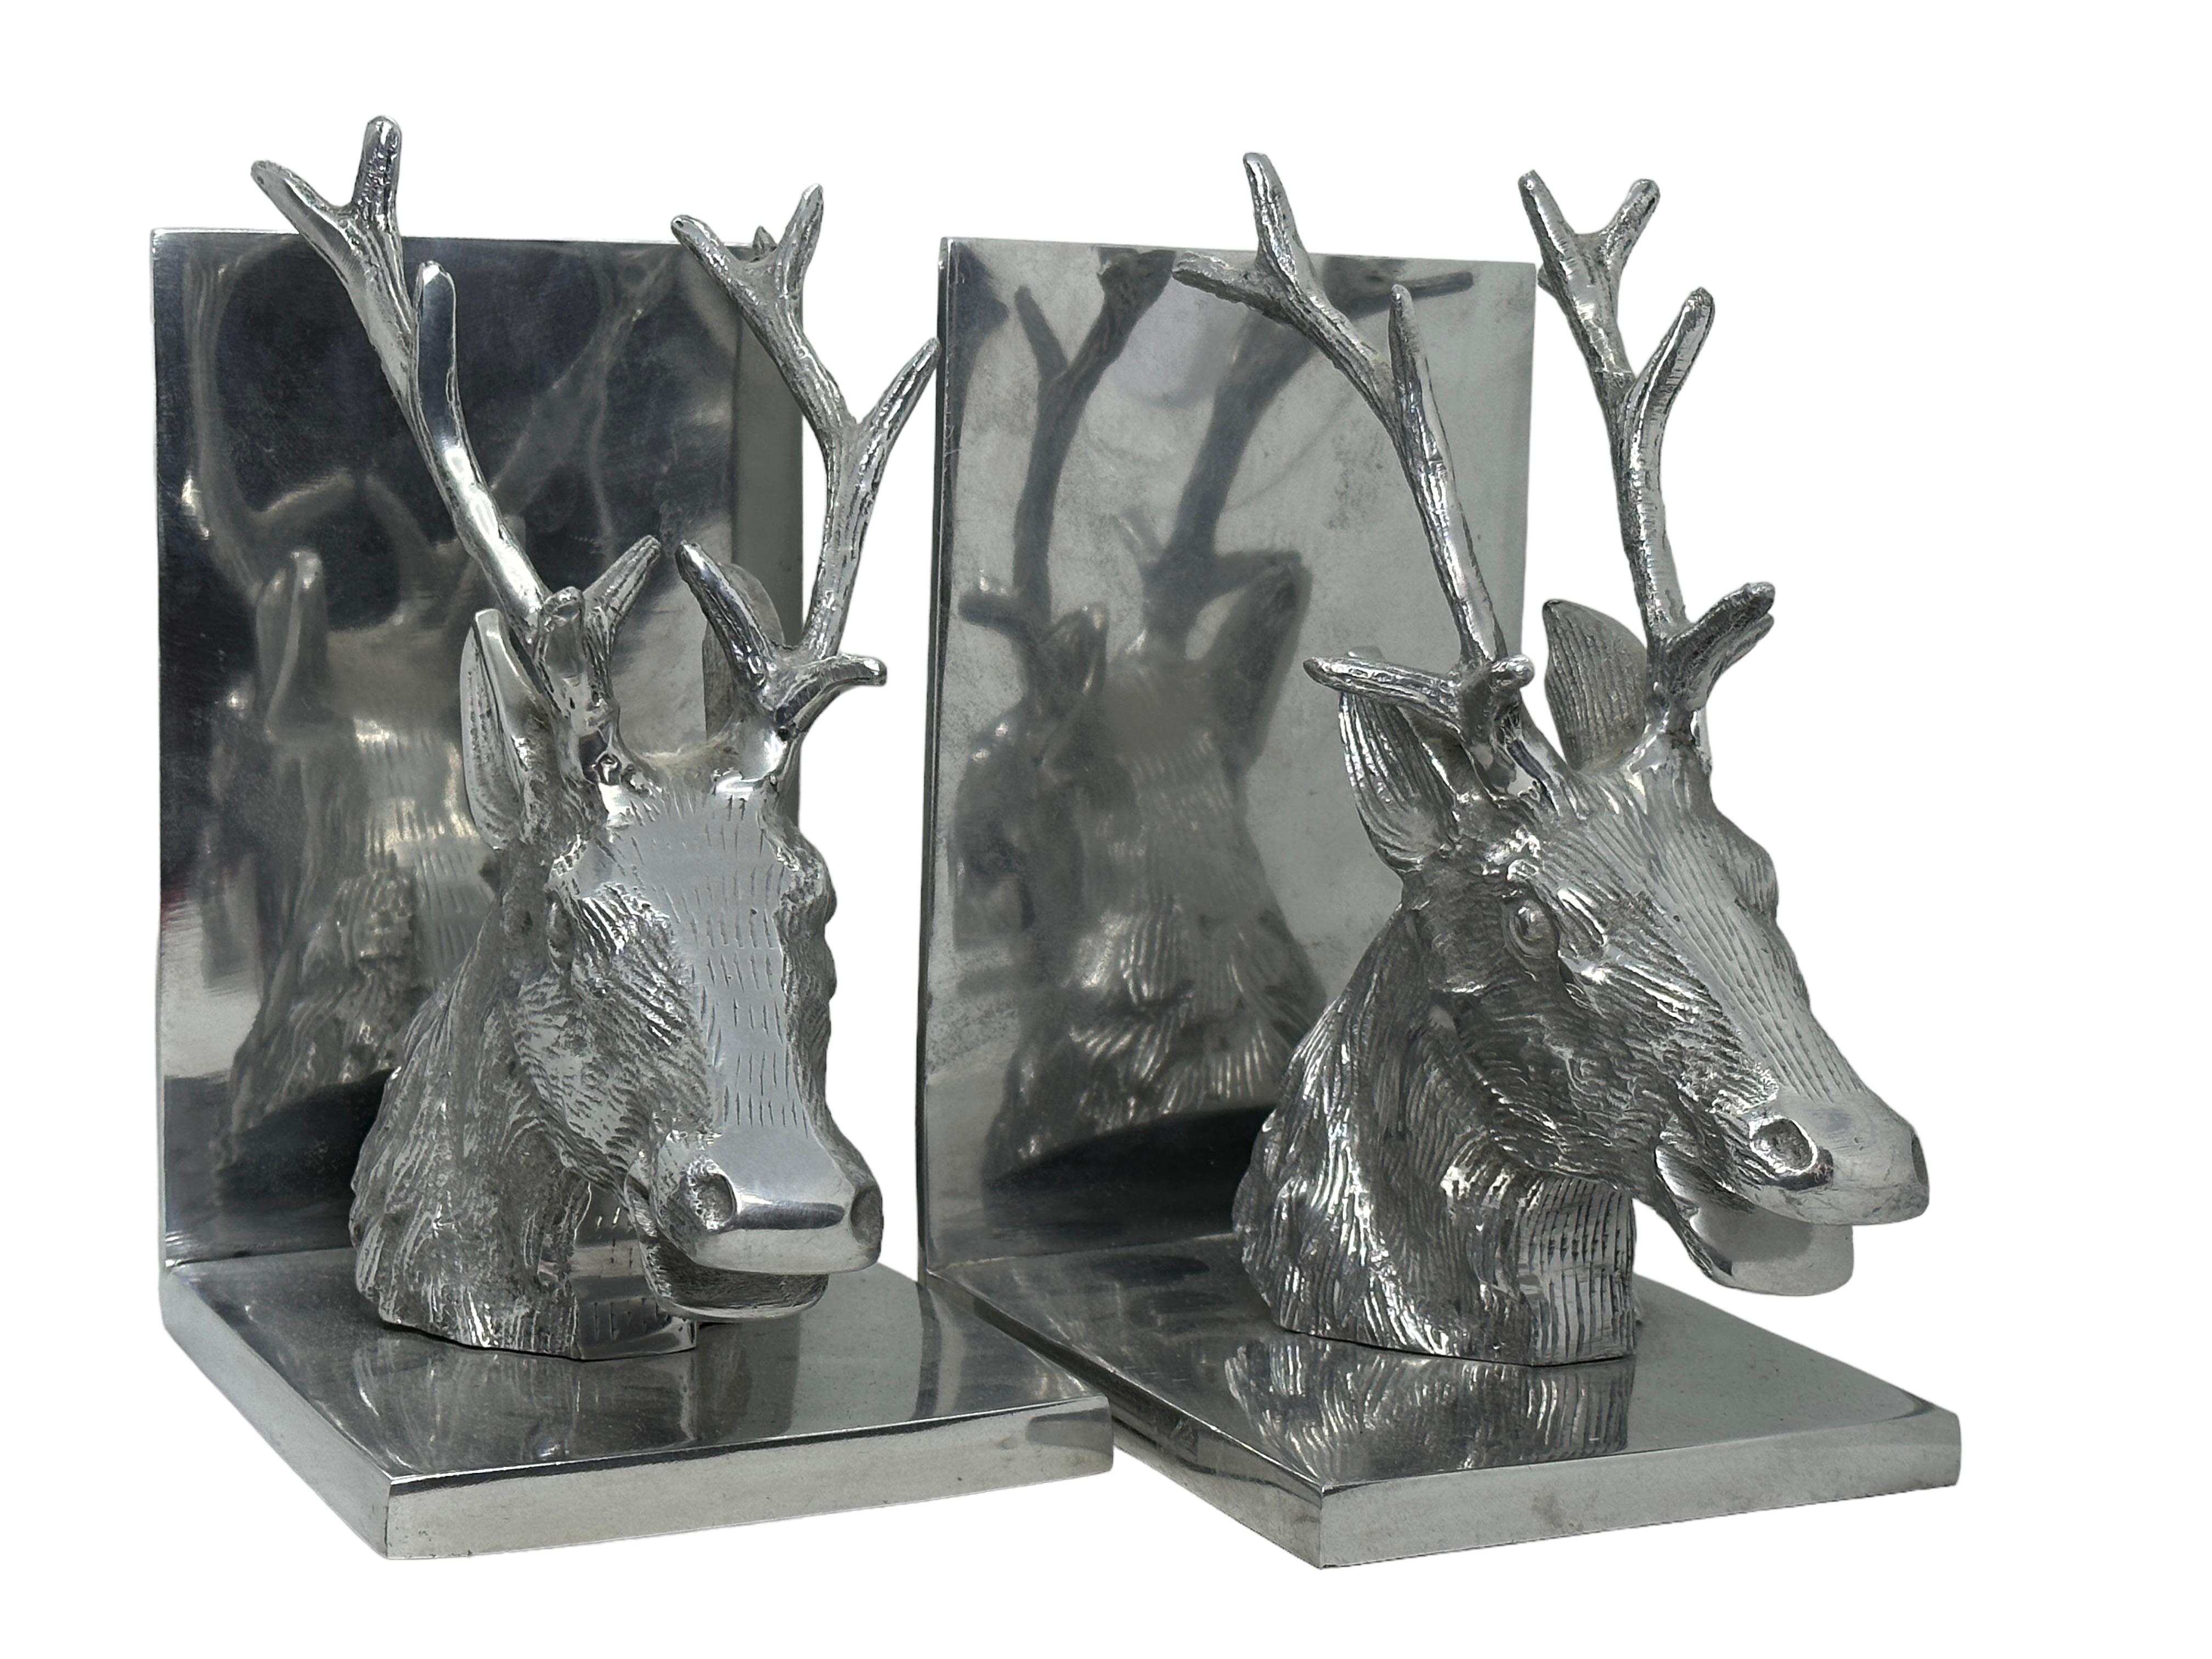 Vintage pair of polished aluminum deer bookends, circa 1980s. Pair of polished decorative bookends in realistic style. Very sturdy and heavy. Great for holding up books on a bookshelf or as paper weights on a desk or decorative animal sculptures